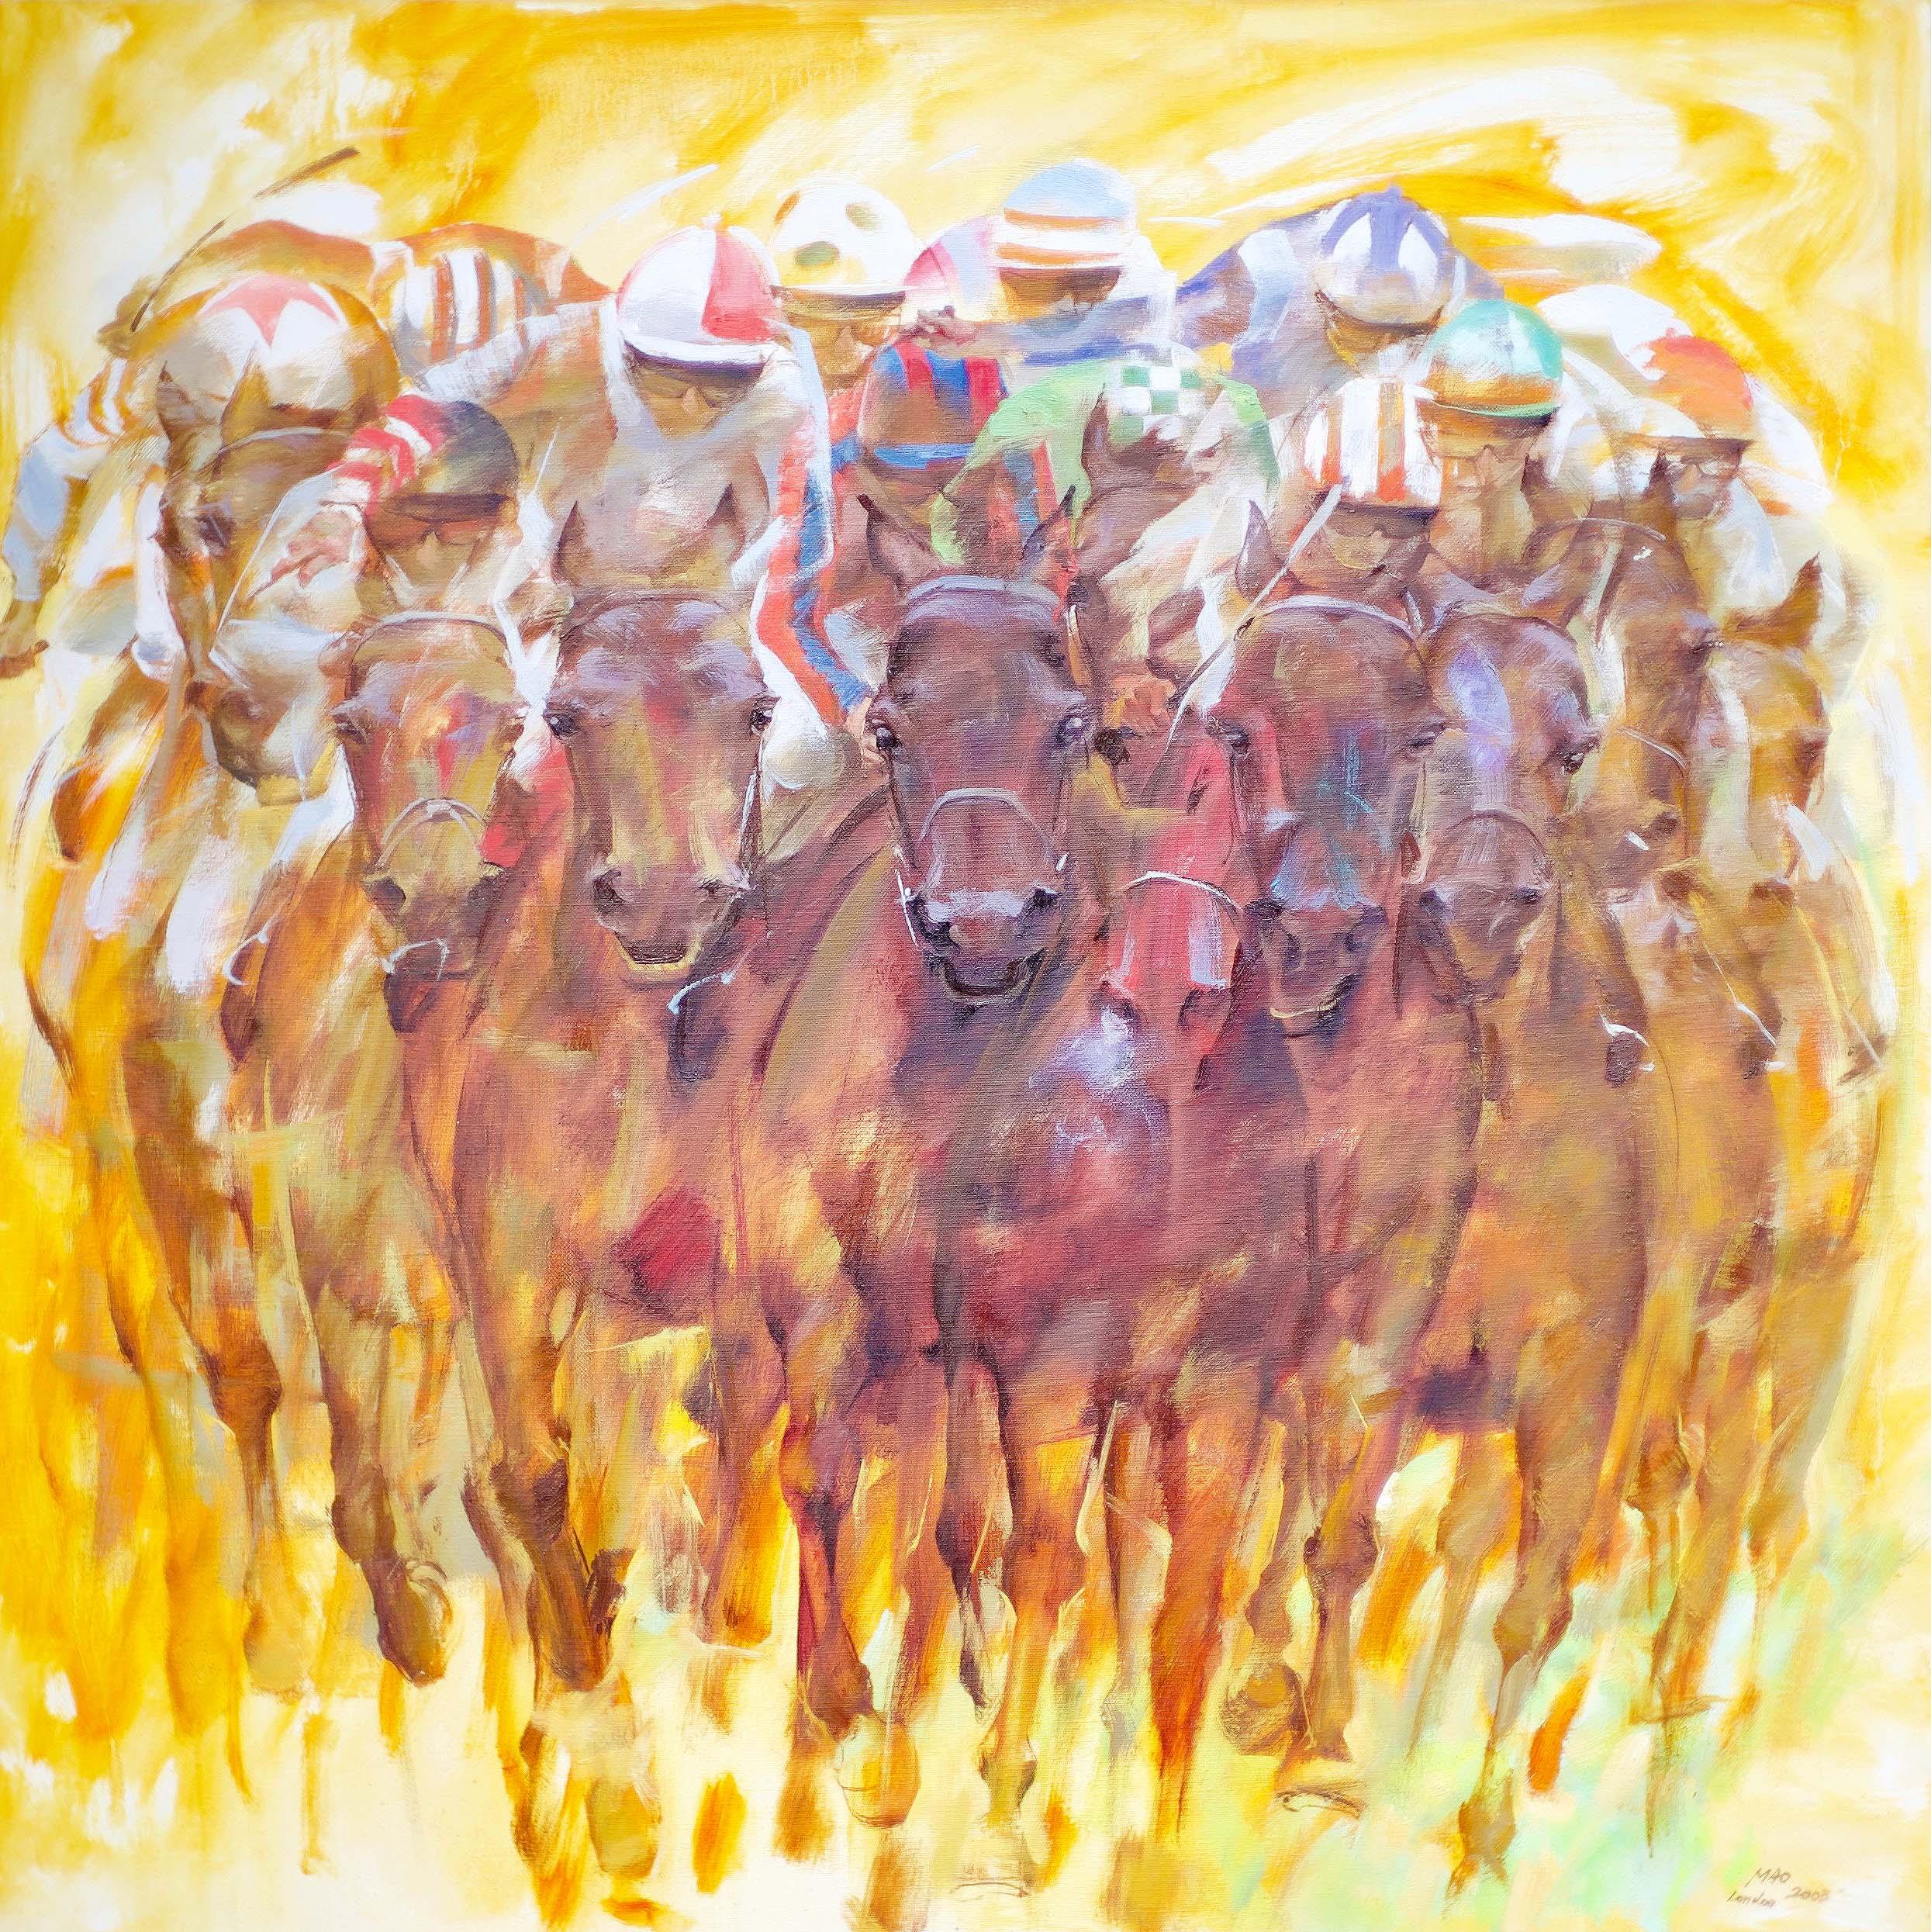 Mao Wen Bio Animal Painting - Head On - Racing, Equestrian, Sport, Contemporary, Abstract